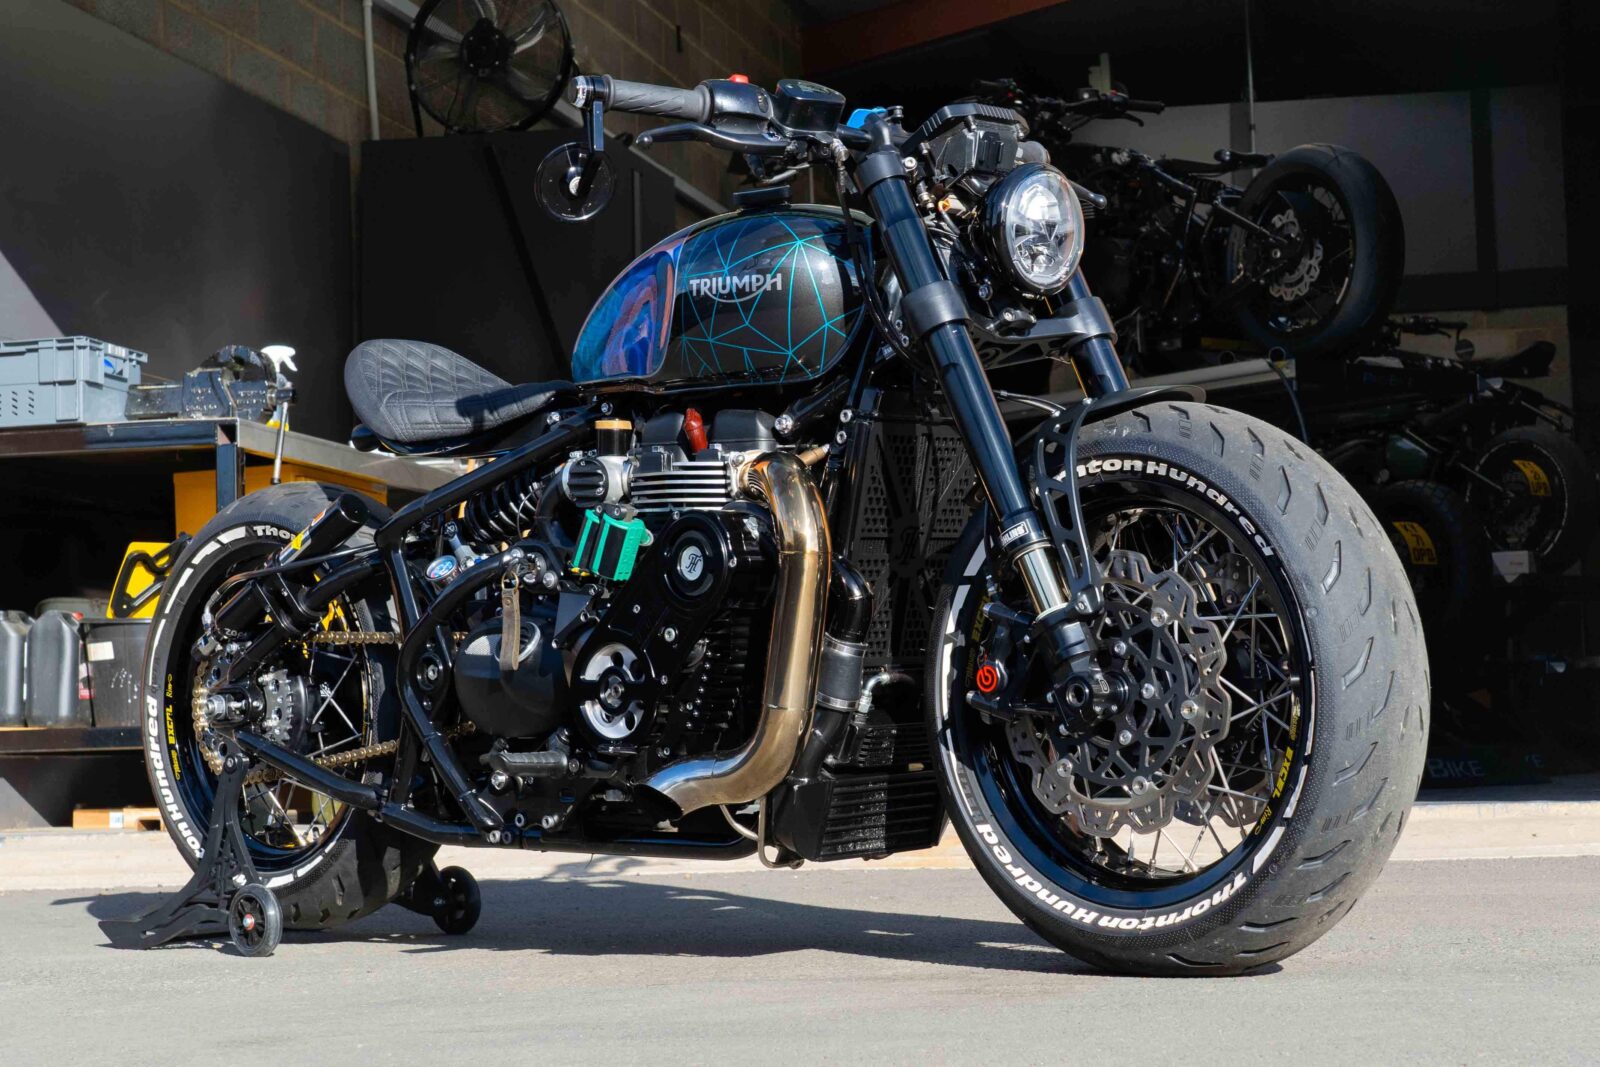 The World's Fastest Bobber: A Triumph Bobber With A Supercharger + NOS –  202 RWHP